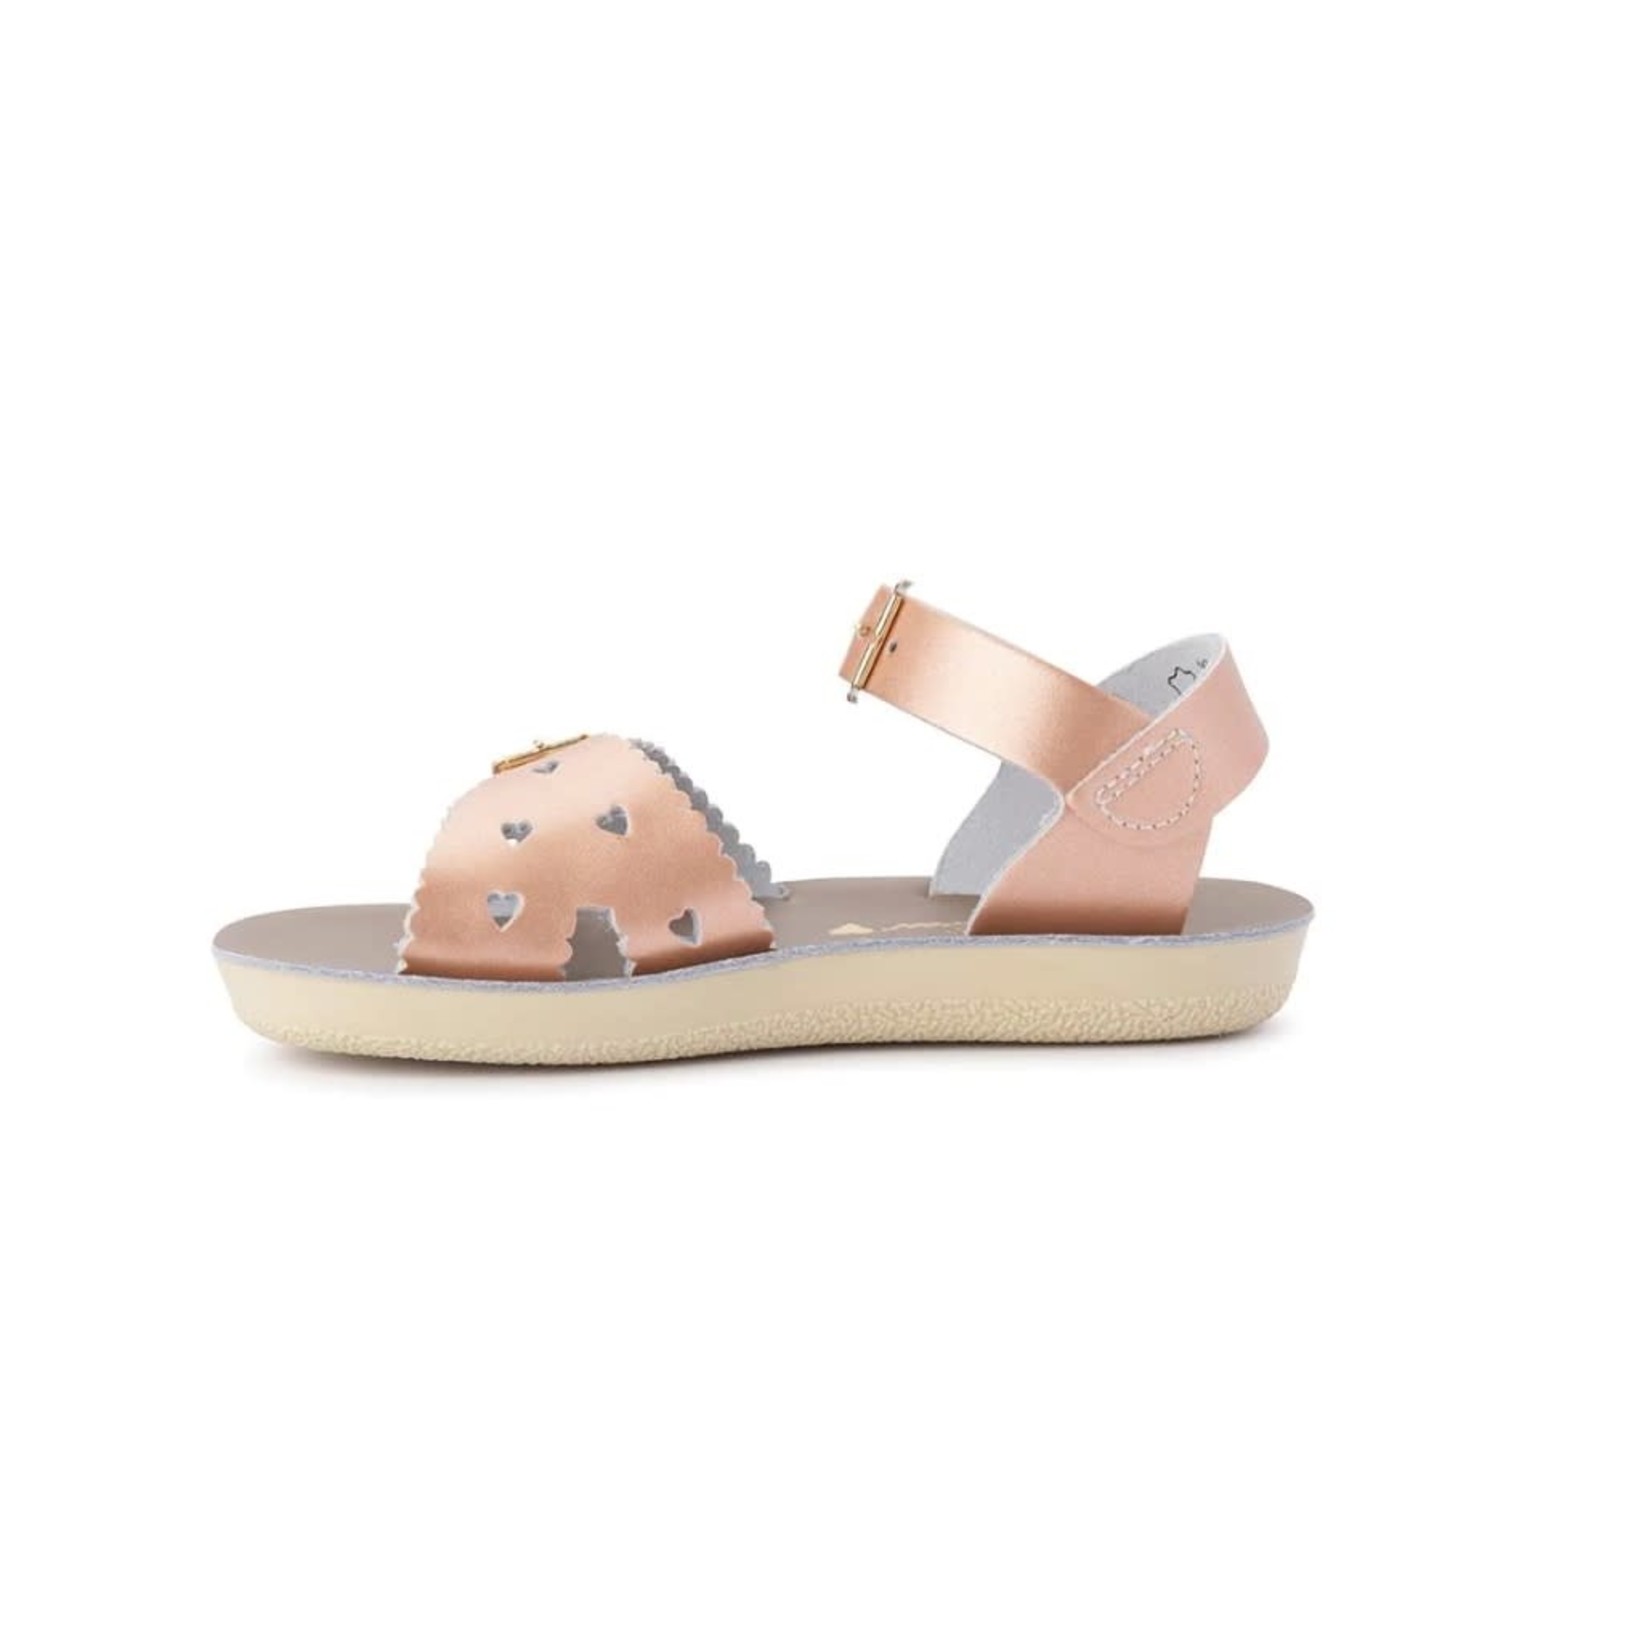 Saltwater Sandals SALTWATER SANDALS - Sandales de cuir à orteils ouverts 'Sweetheart - Rose Gold'